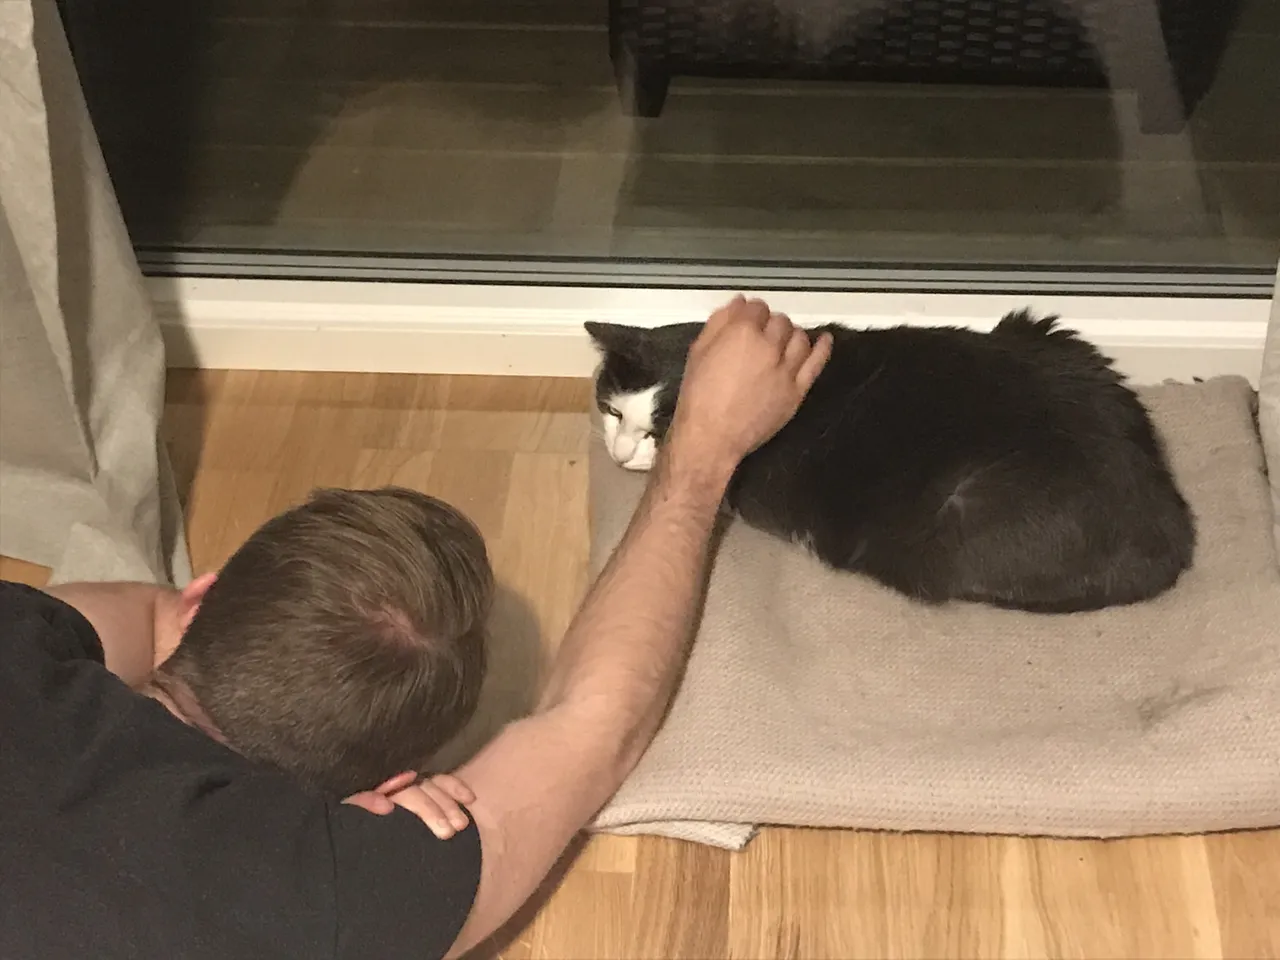 After a few days we could try to give him some cuddles. This is my boyfriend showing him some love.